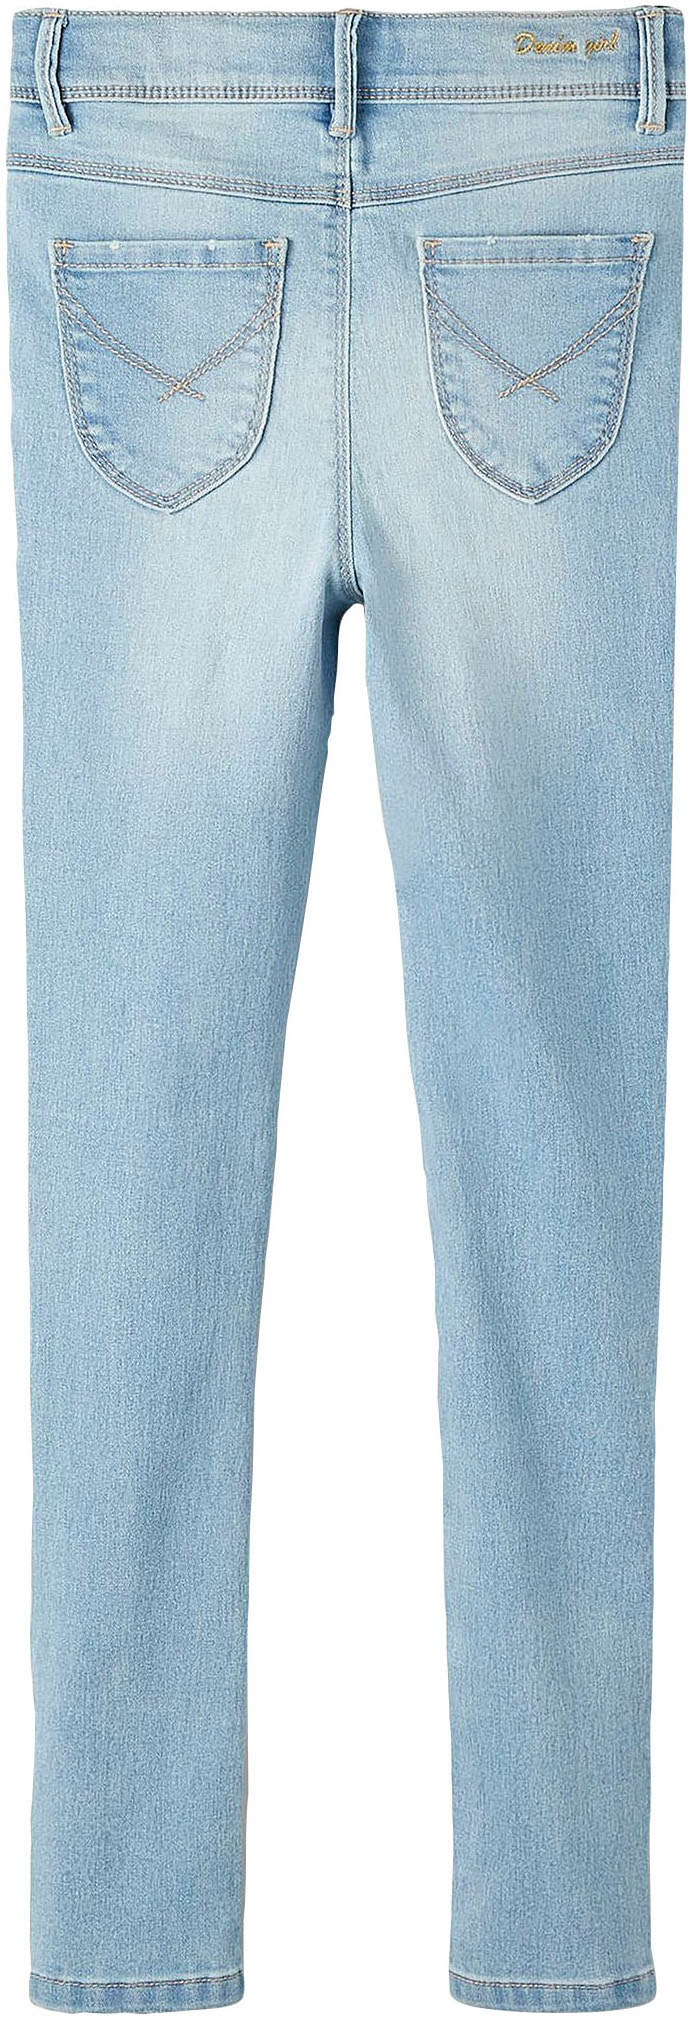 It HW DNMTHRIS bei Name PANT Skinny-fit-Jeans »NKFPOLLY OTTO PB«